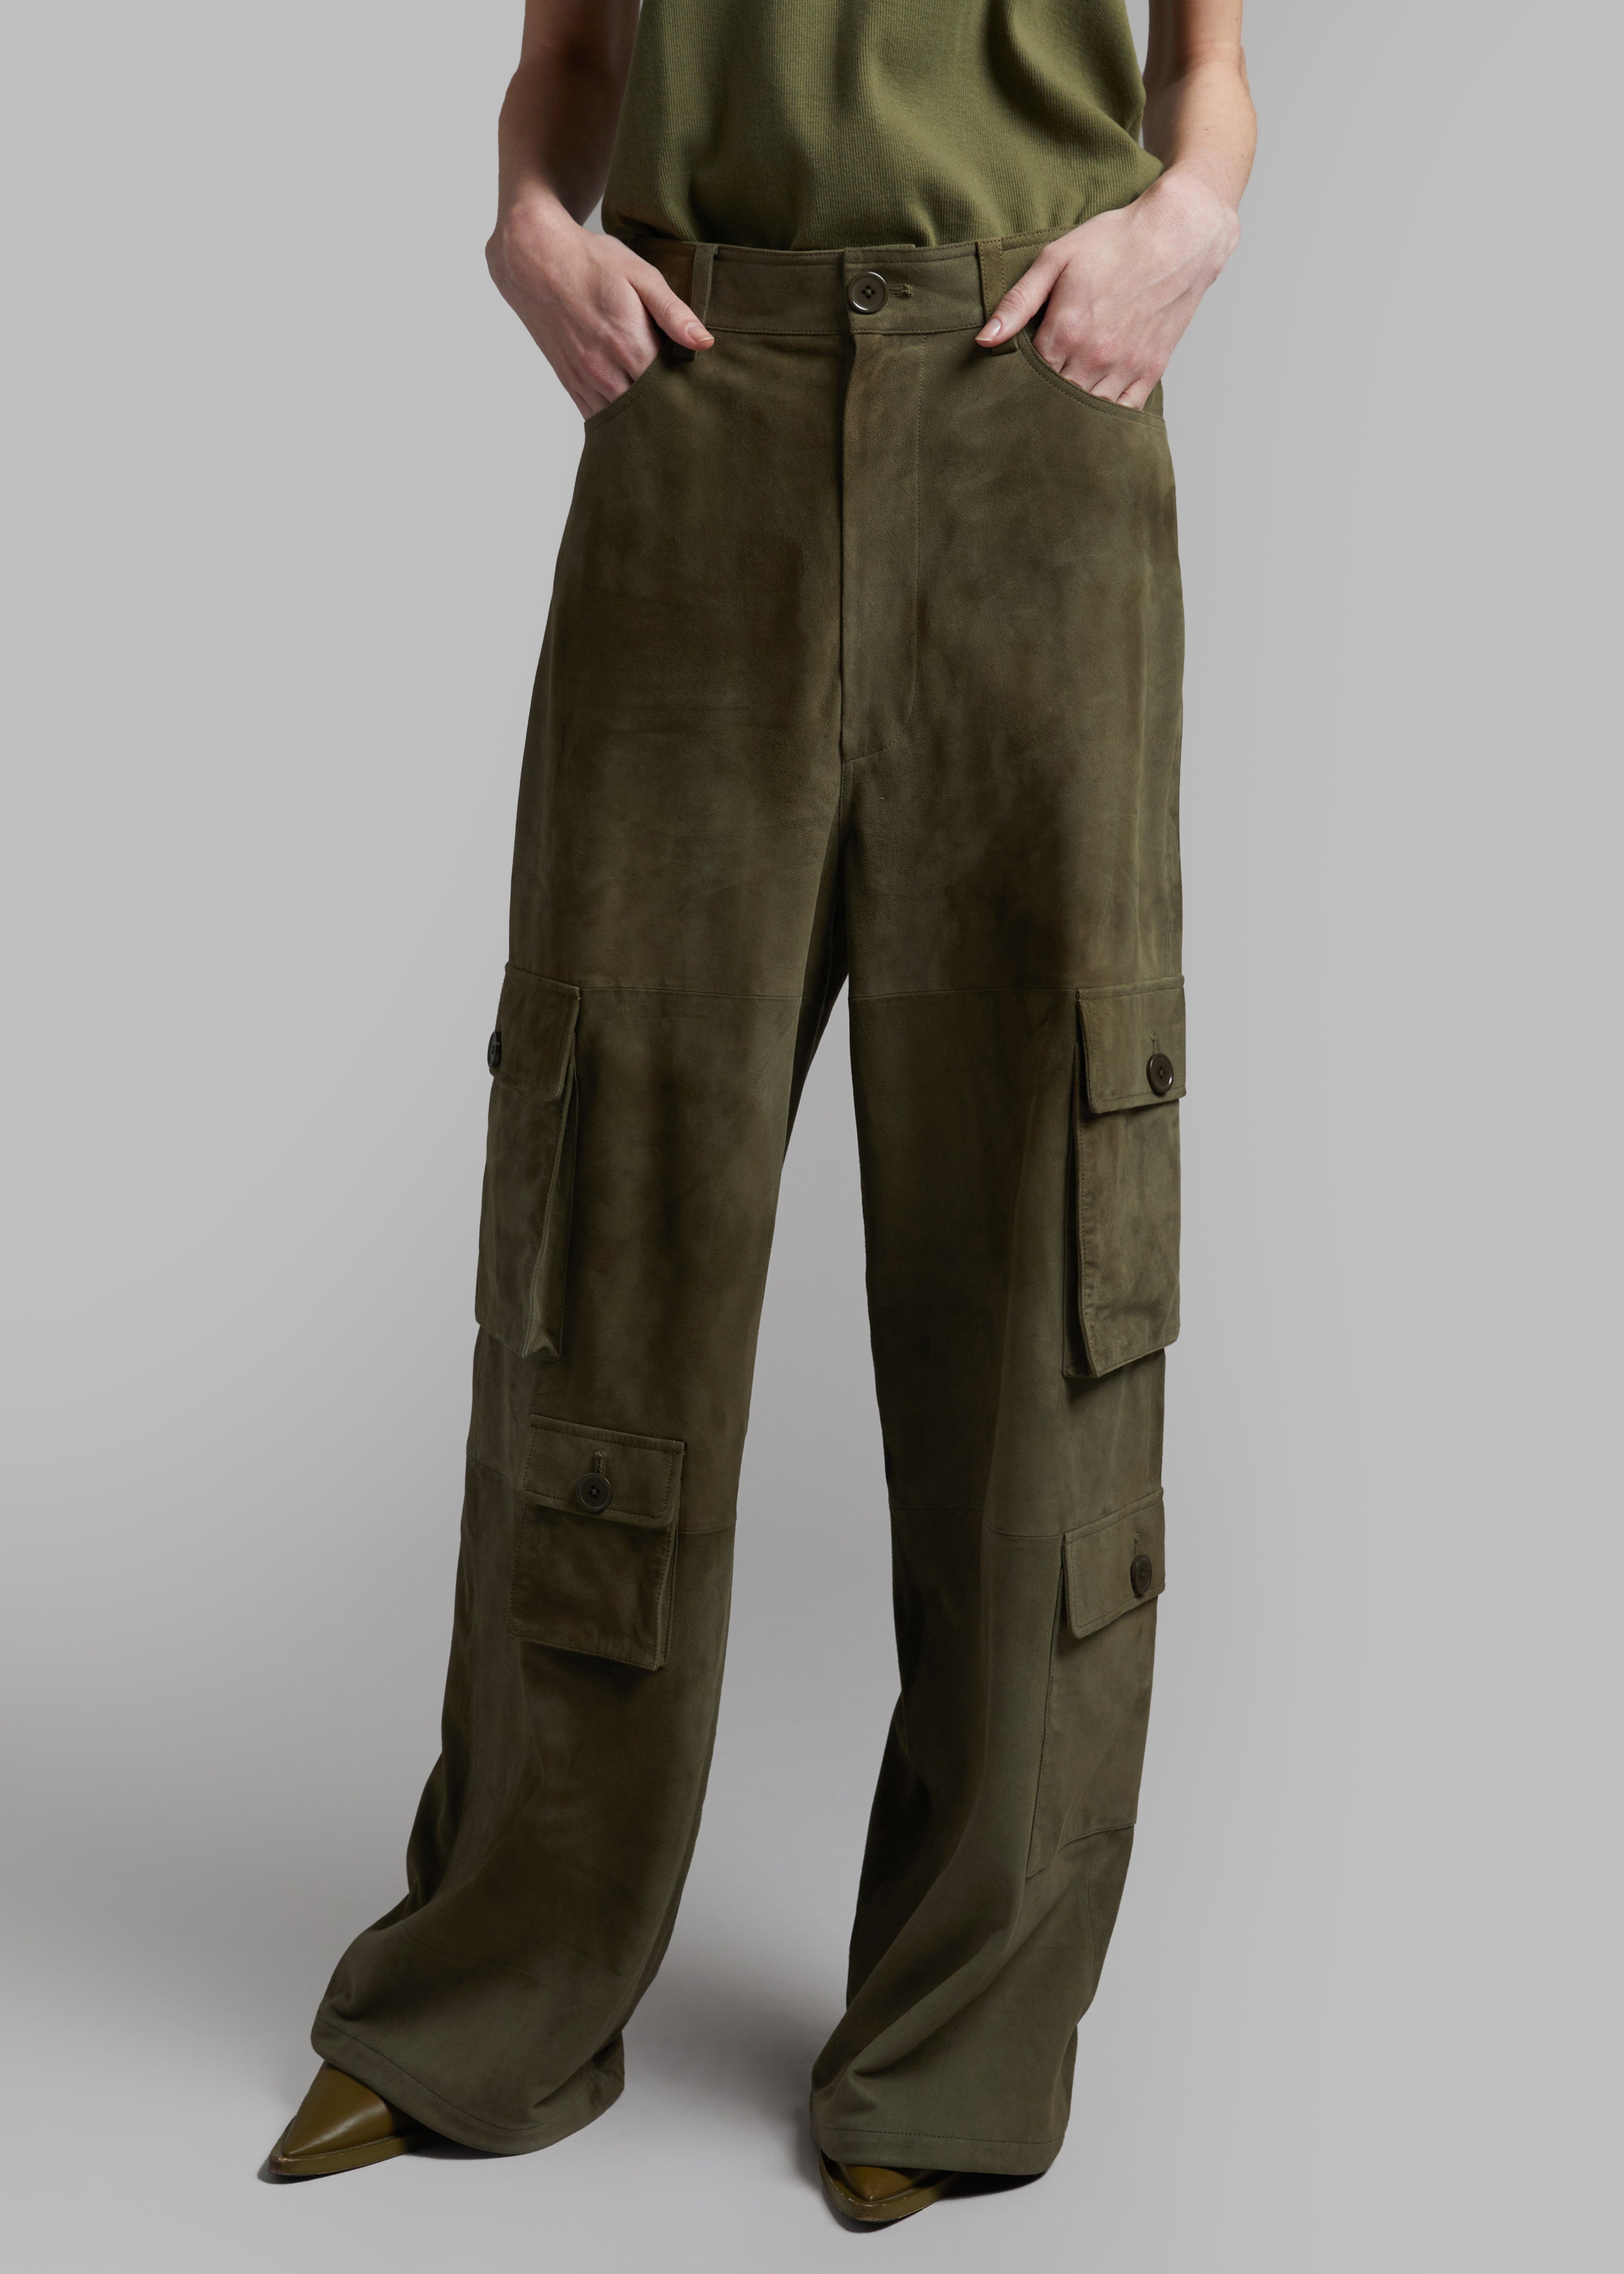 Hailey Suede Oversized Cargo Pants - Olive - 4